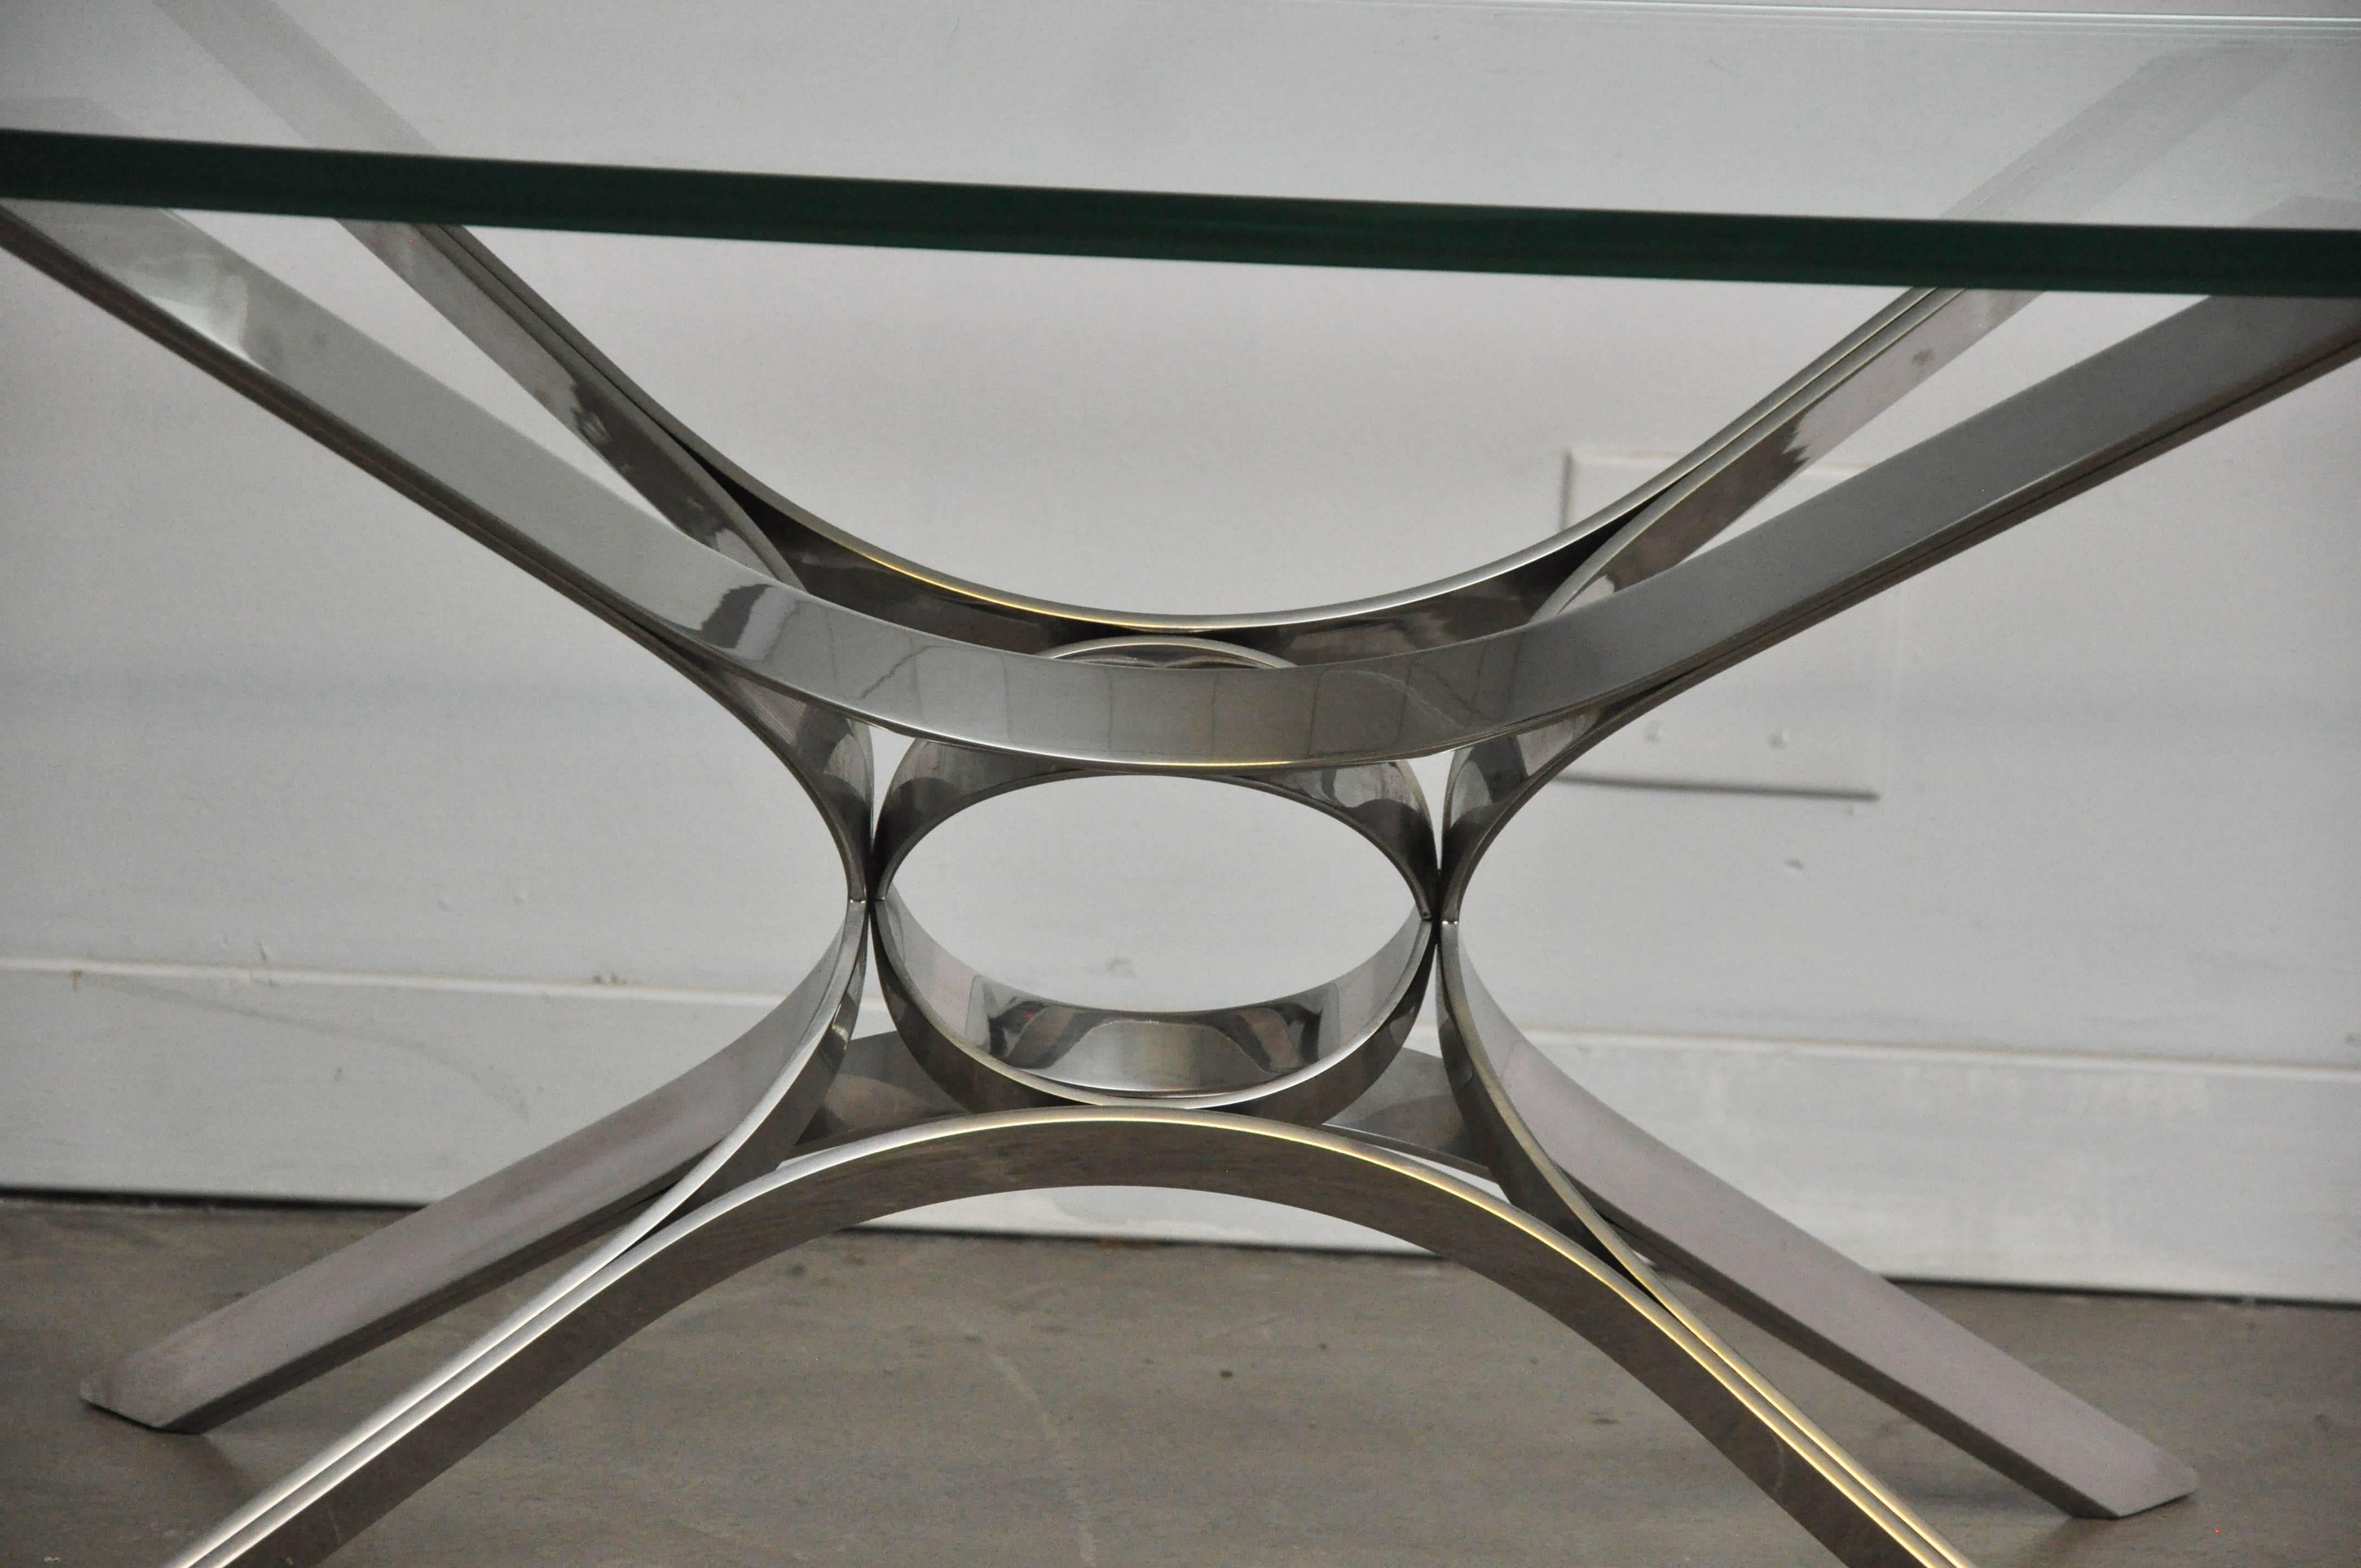 American Sculptural Chrome Coffee Table by Roger Sprunger for Dunbar